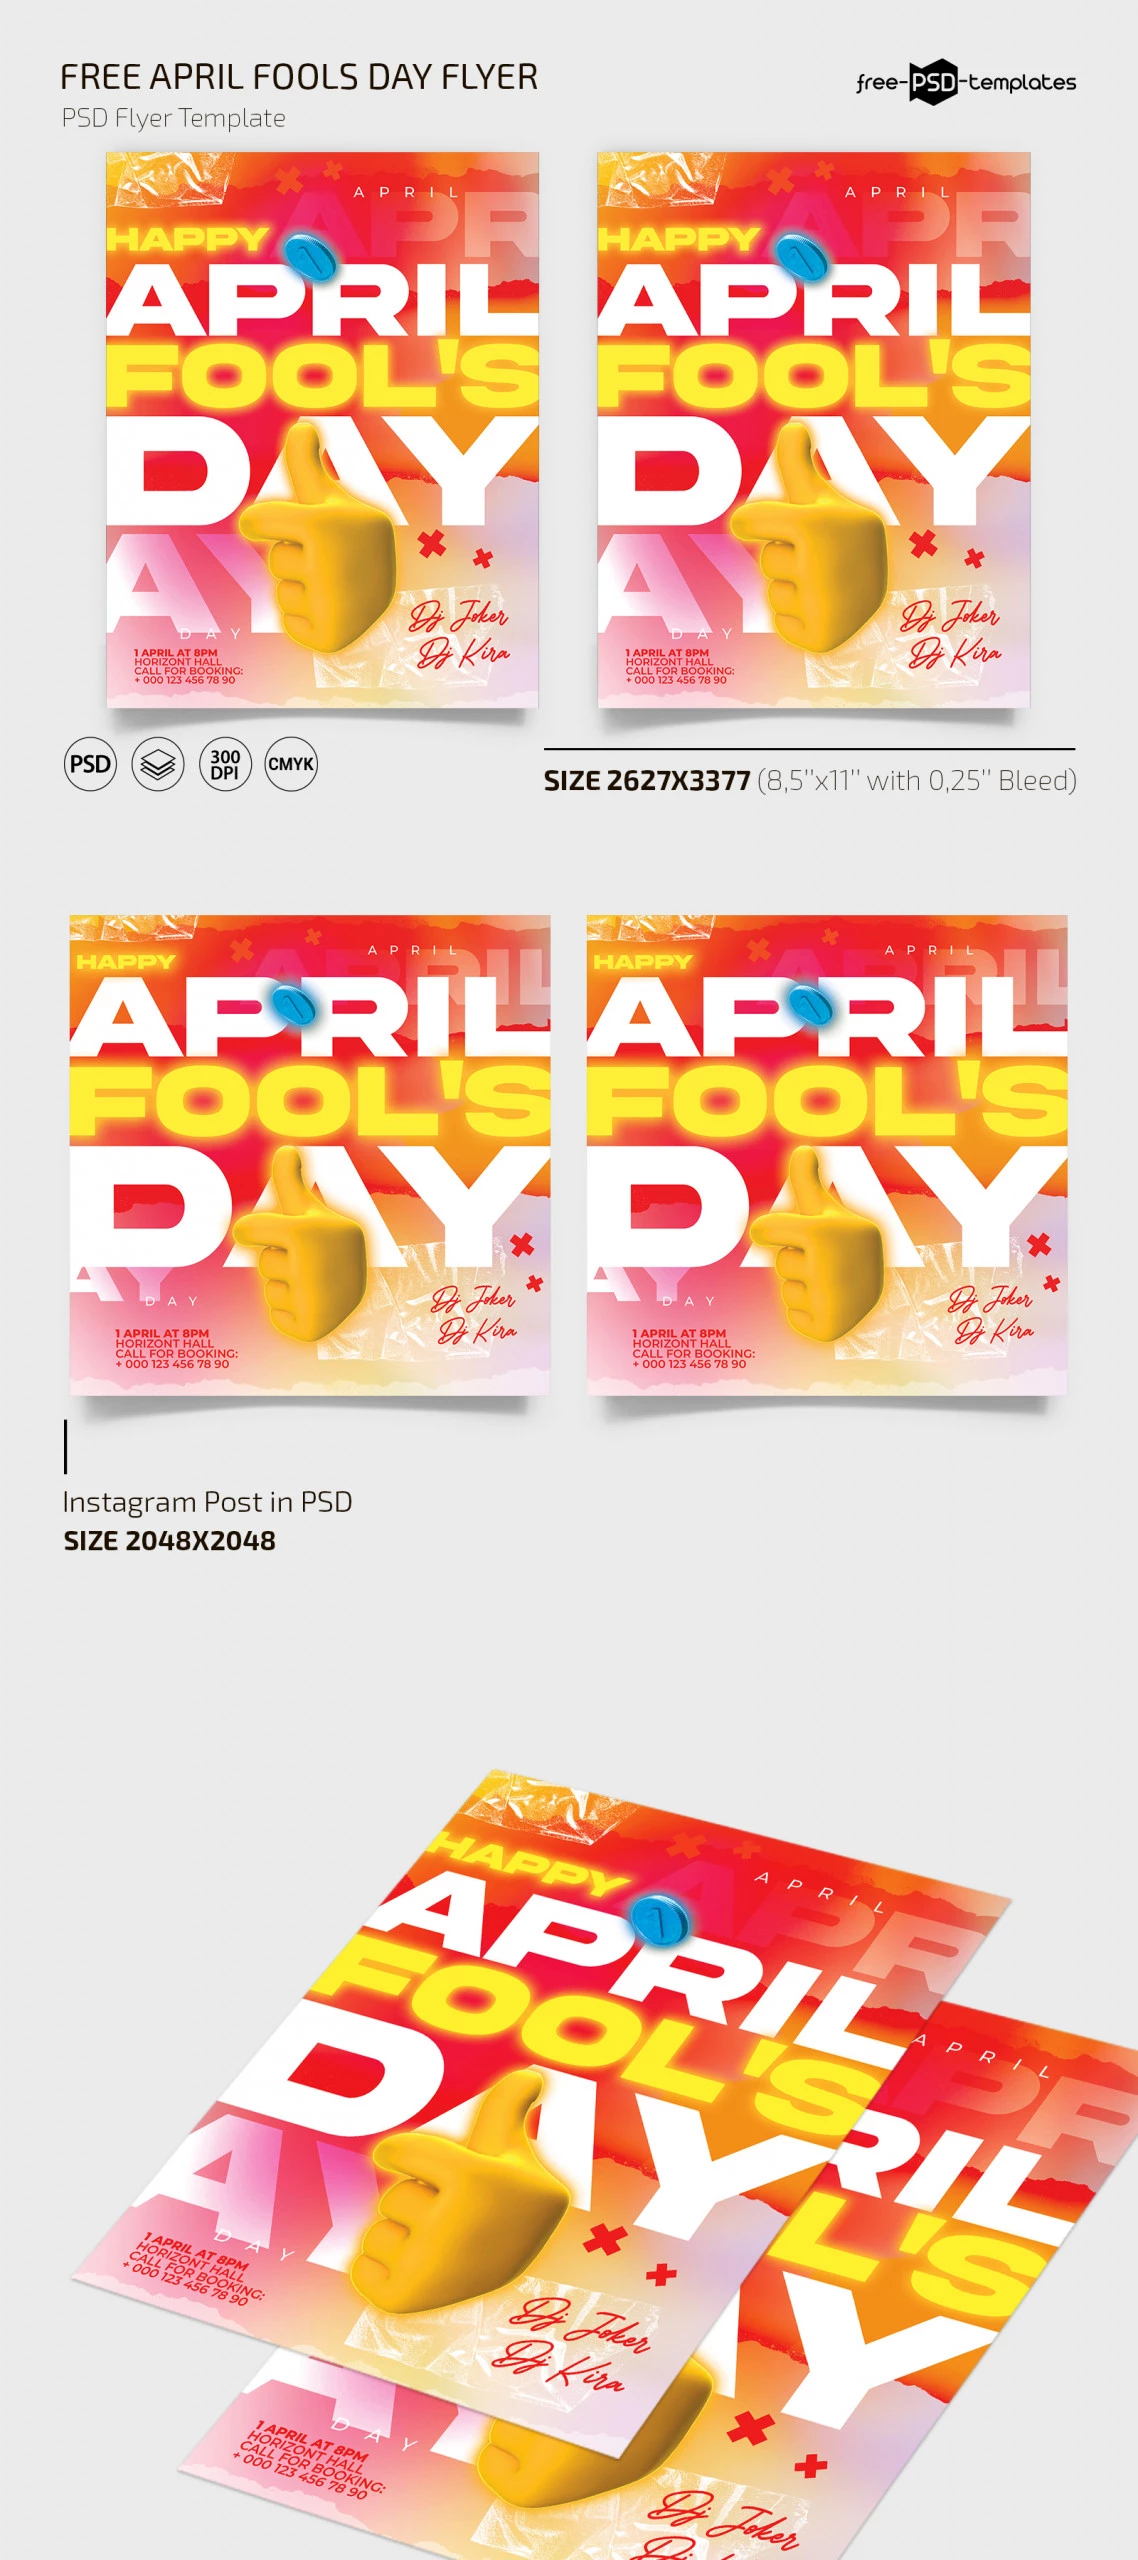 Free April Fools Day Flyer Template + Instagram Post (PSD)